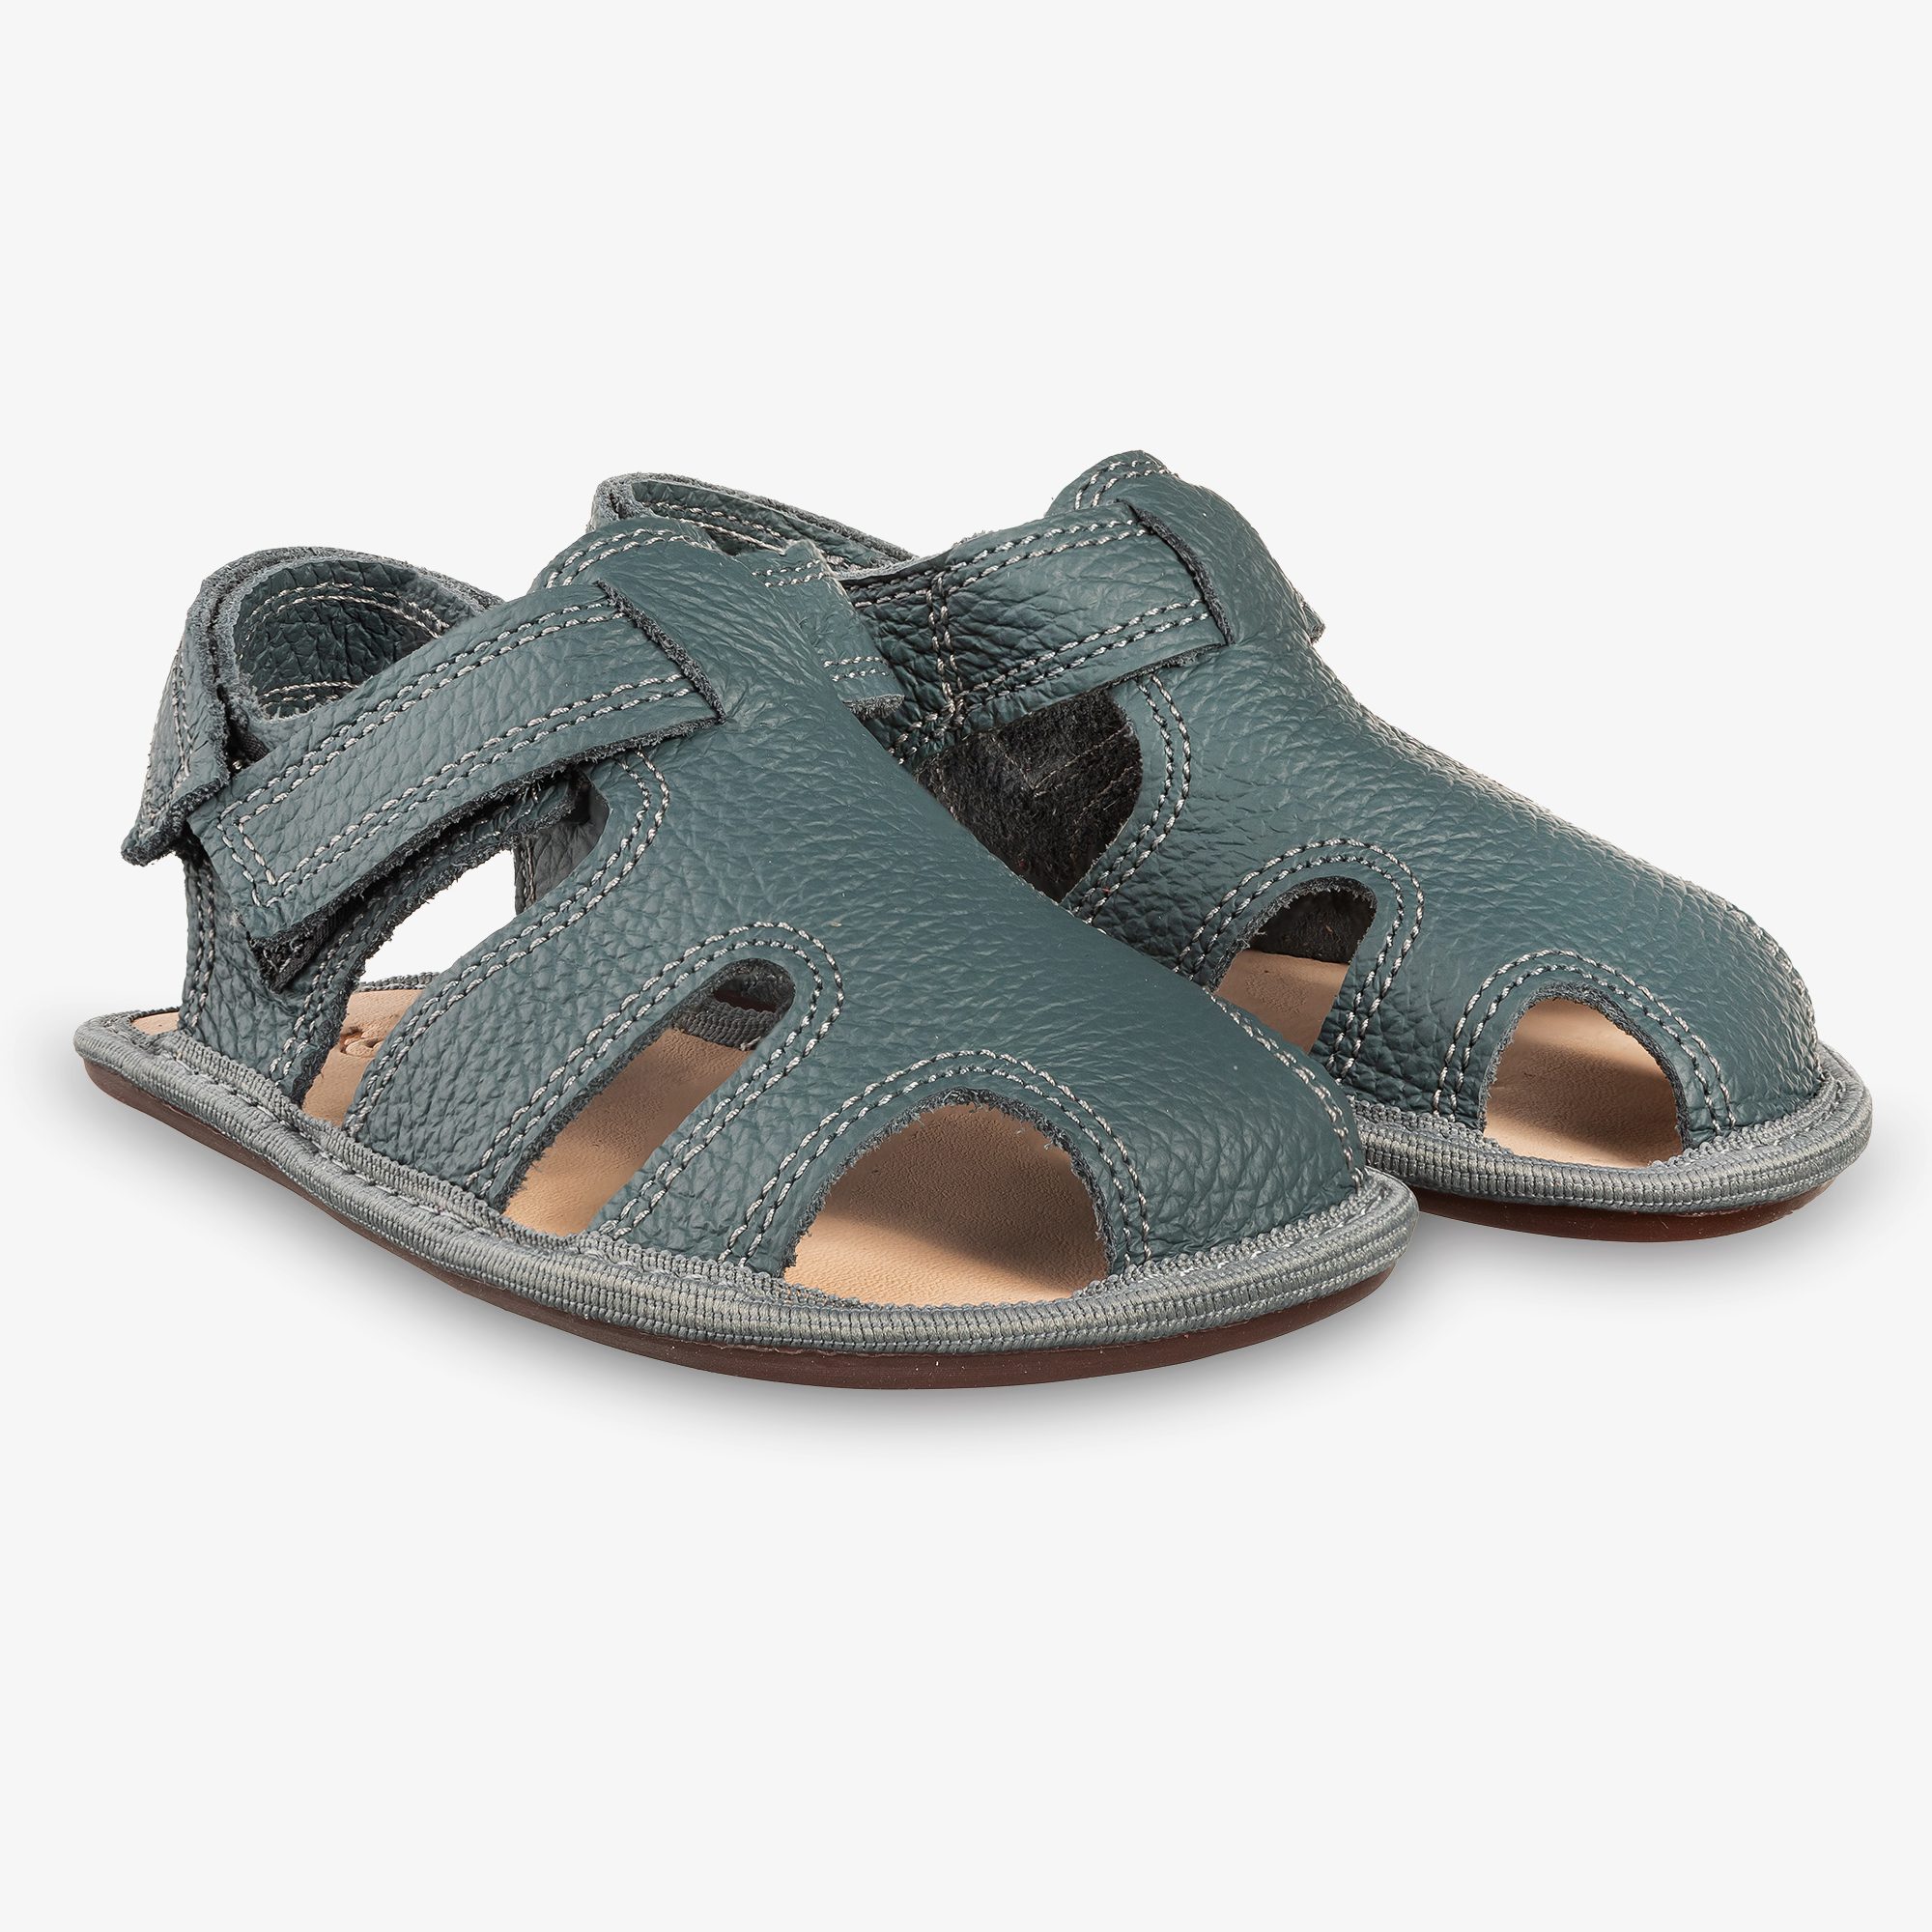 Sandals / Open-toe shoes BOY BLUE Off Road : Sandals / Barefoot . Besson  Chaussures